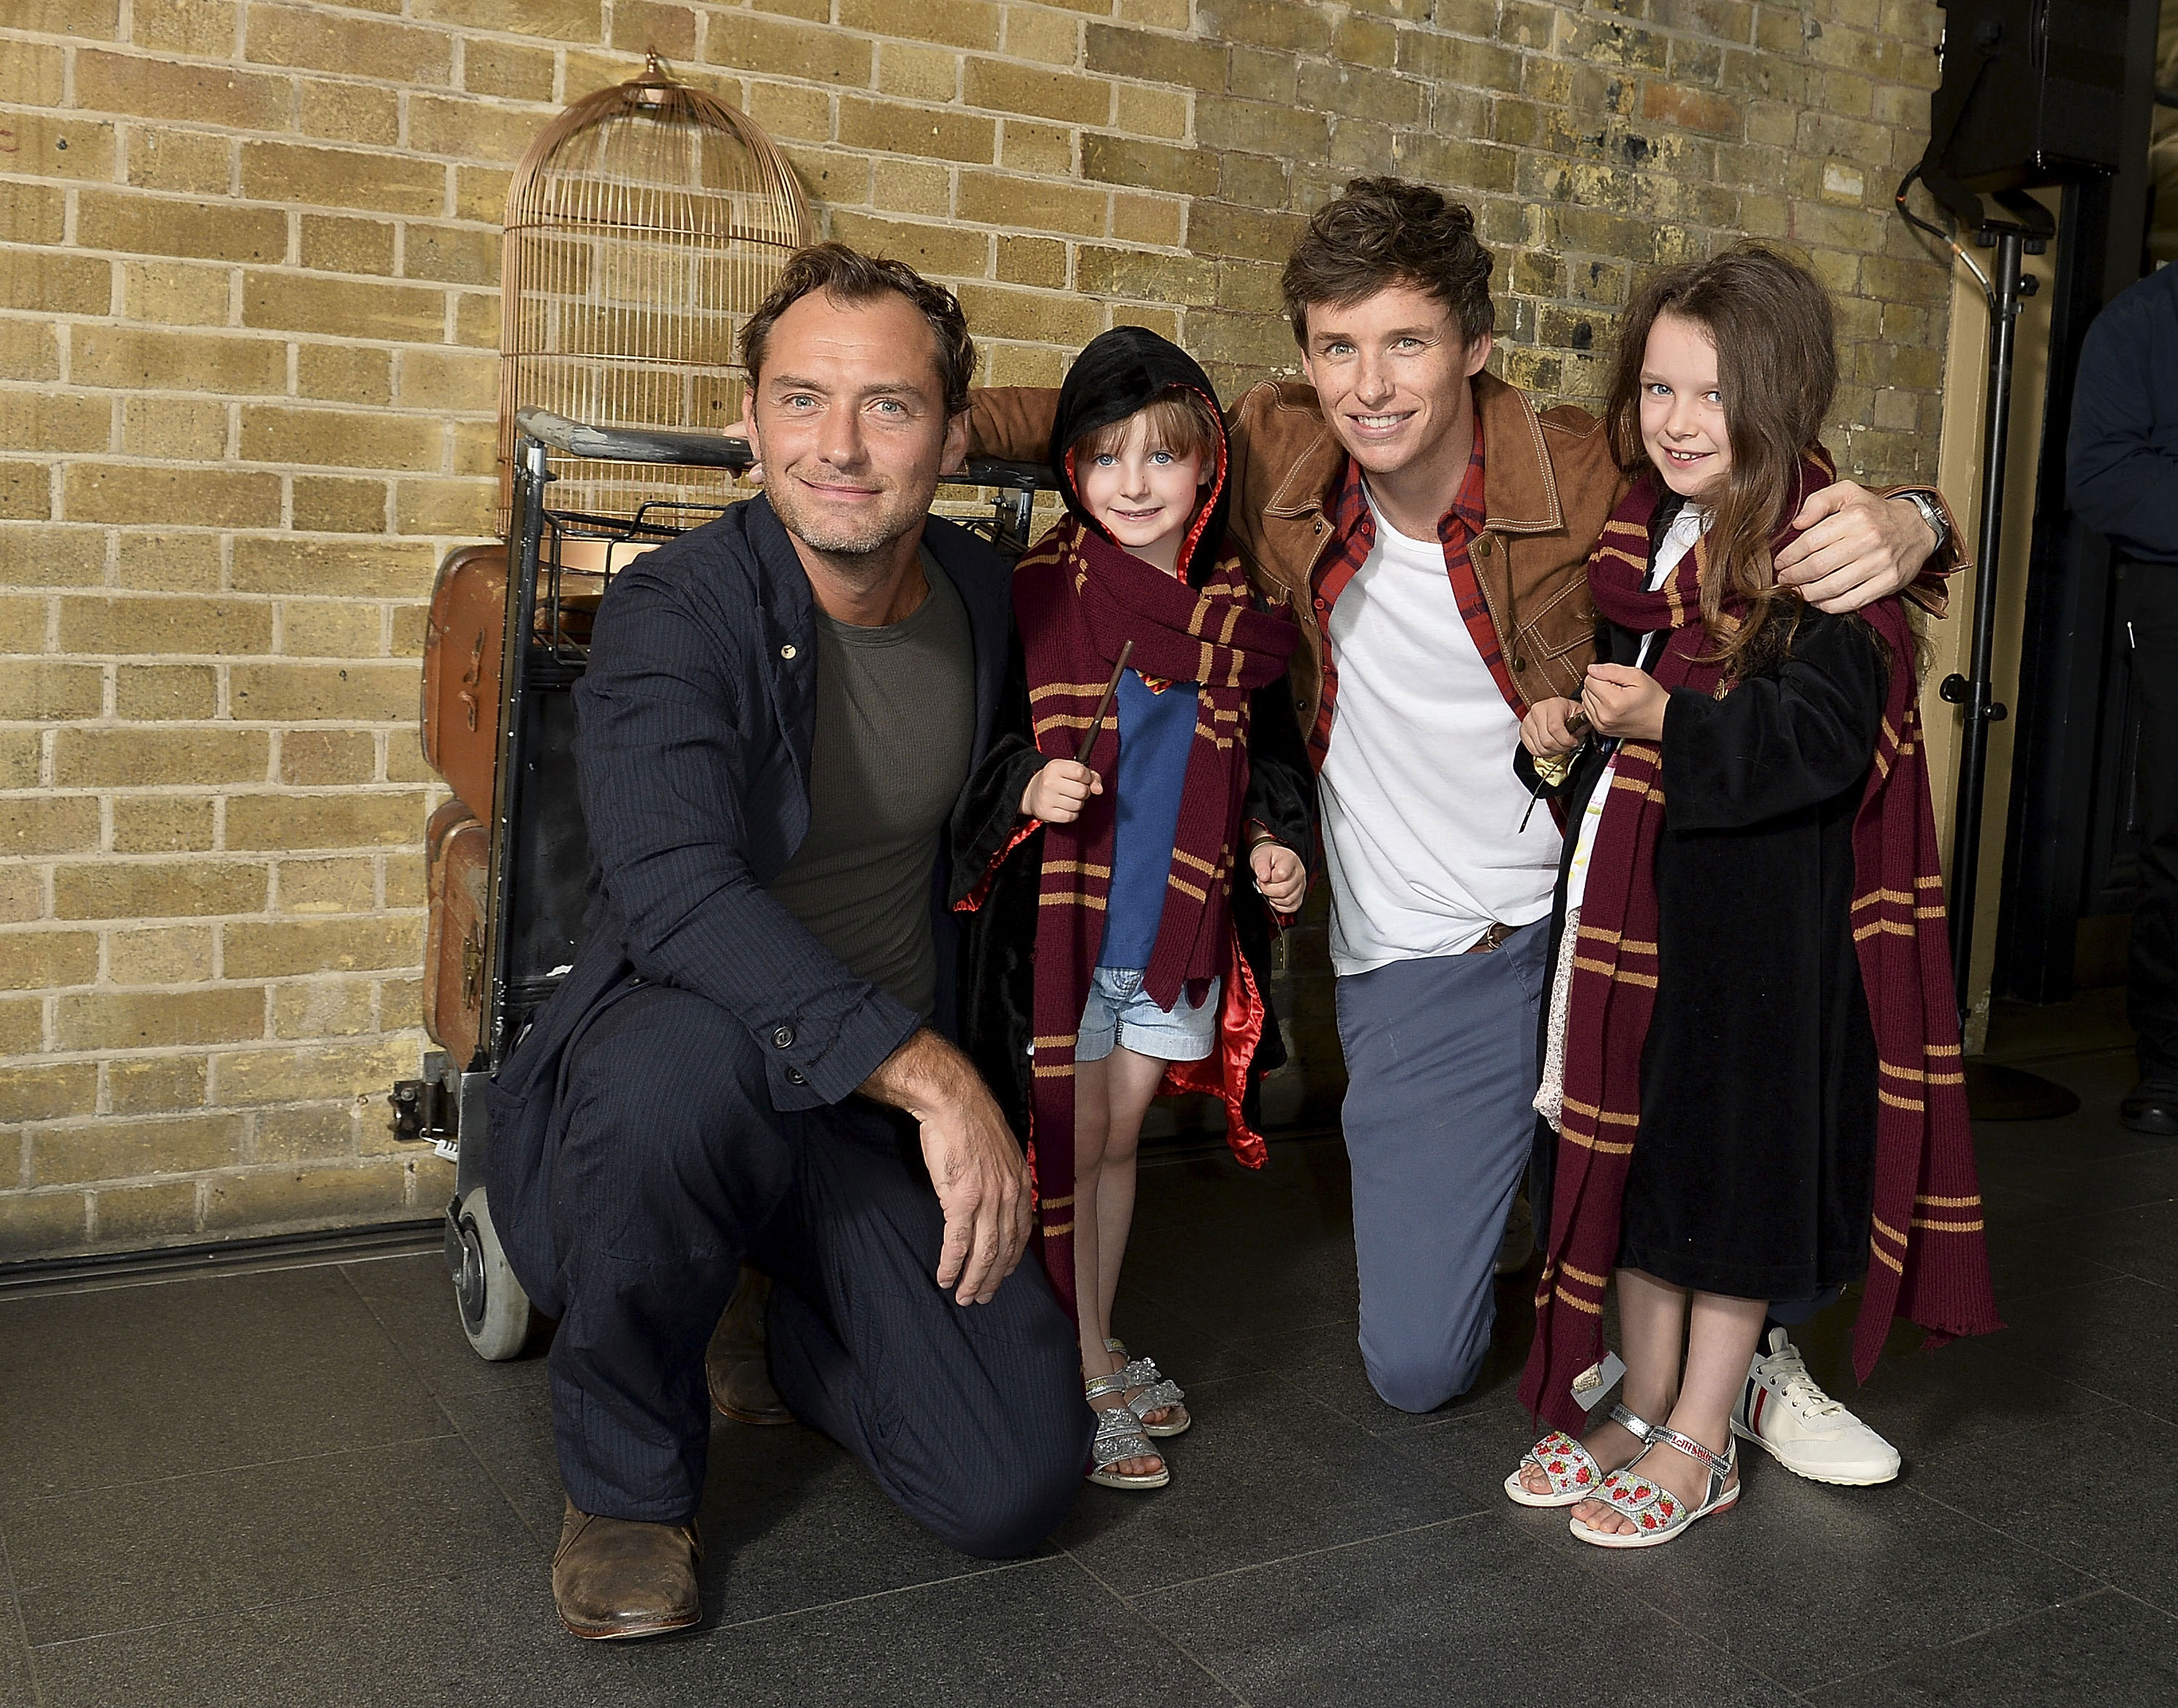 Two adorable young Gryffindors smile for a photo with Law and Redmayne in front of the trolley at Platform 9 3/4.